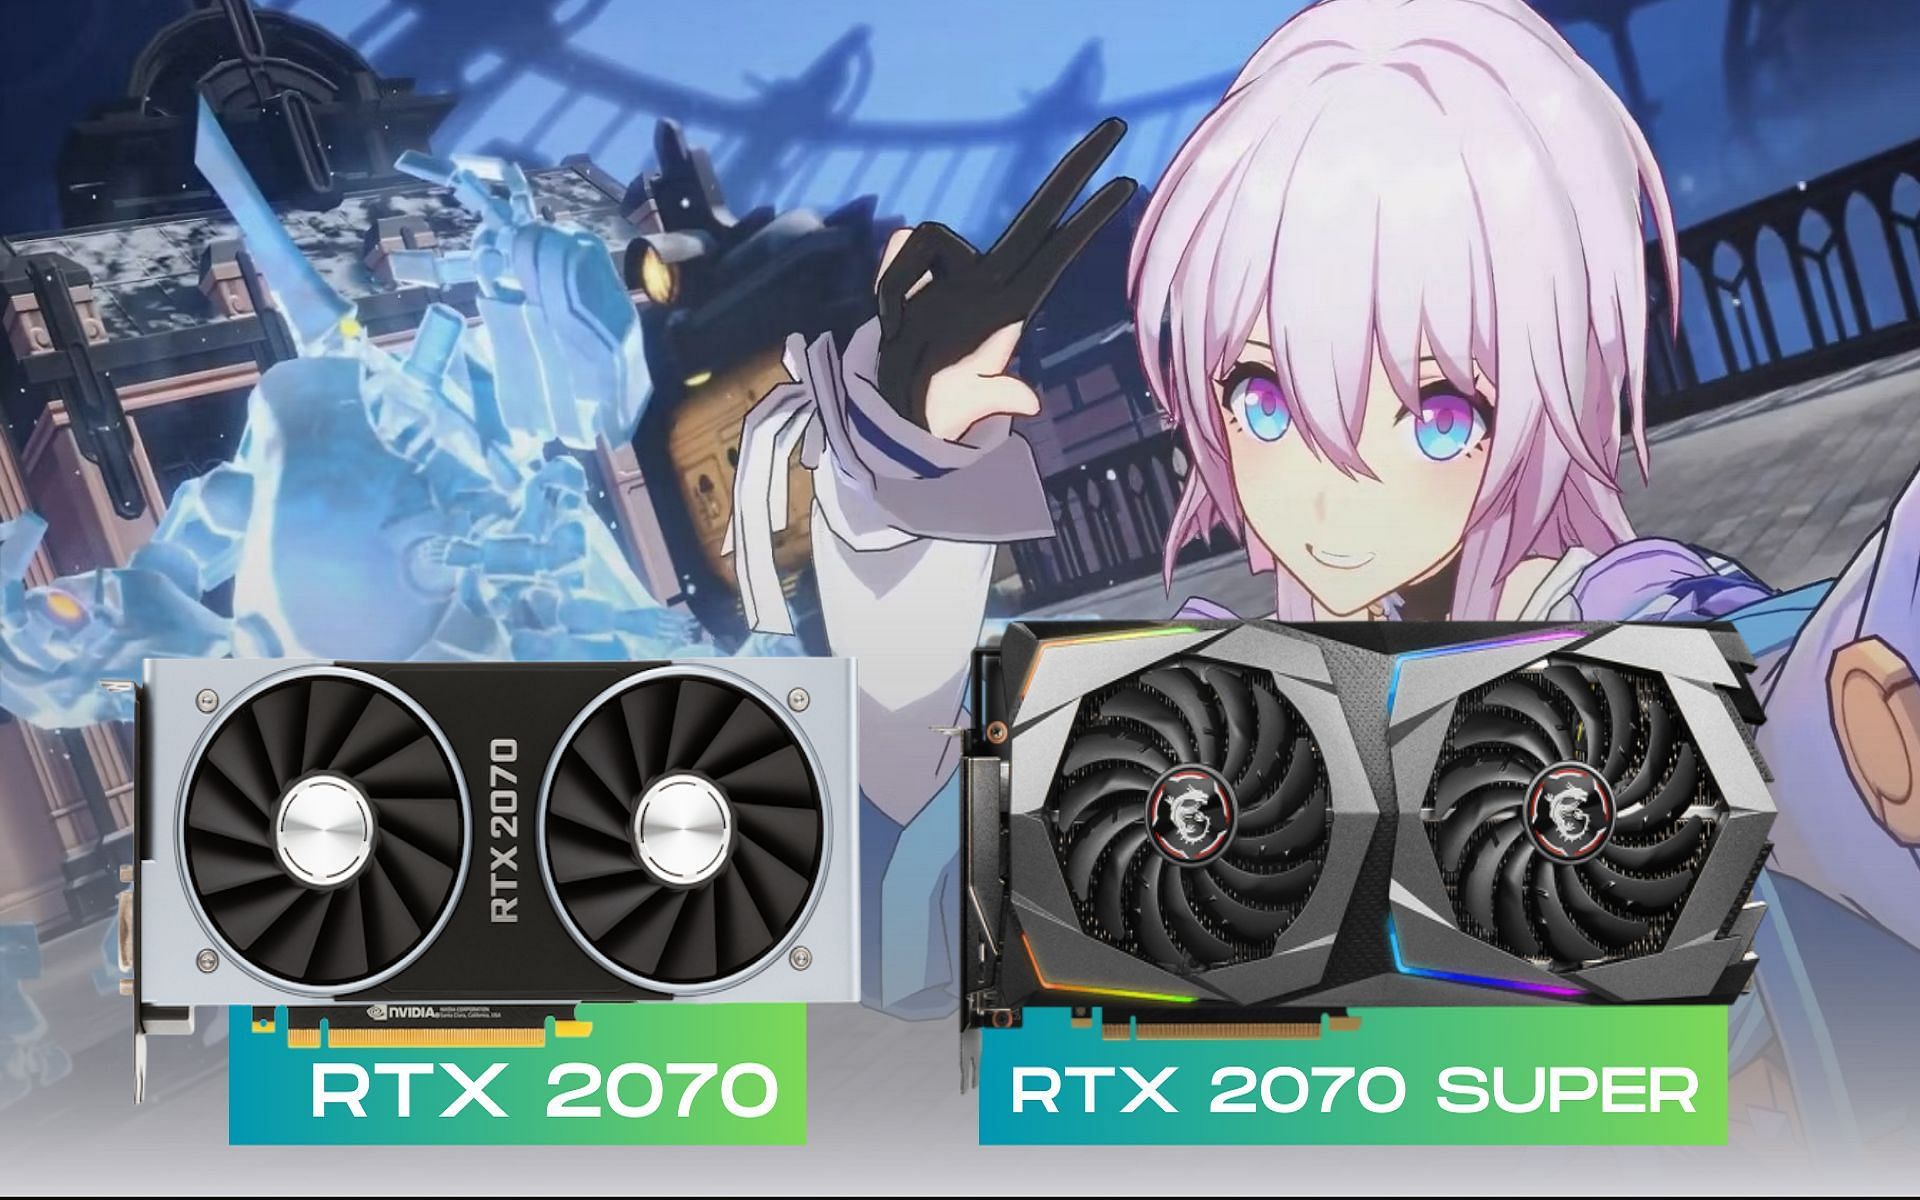 Settings to use in Honkai: Star Rail with the RTX 2070 and the RTX 2070 Super (Image via Sportskeeda)